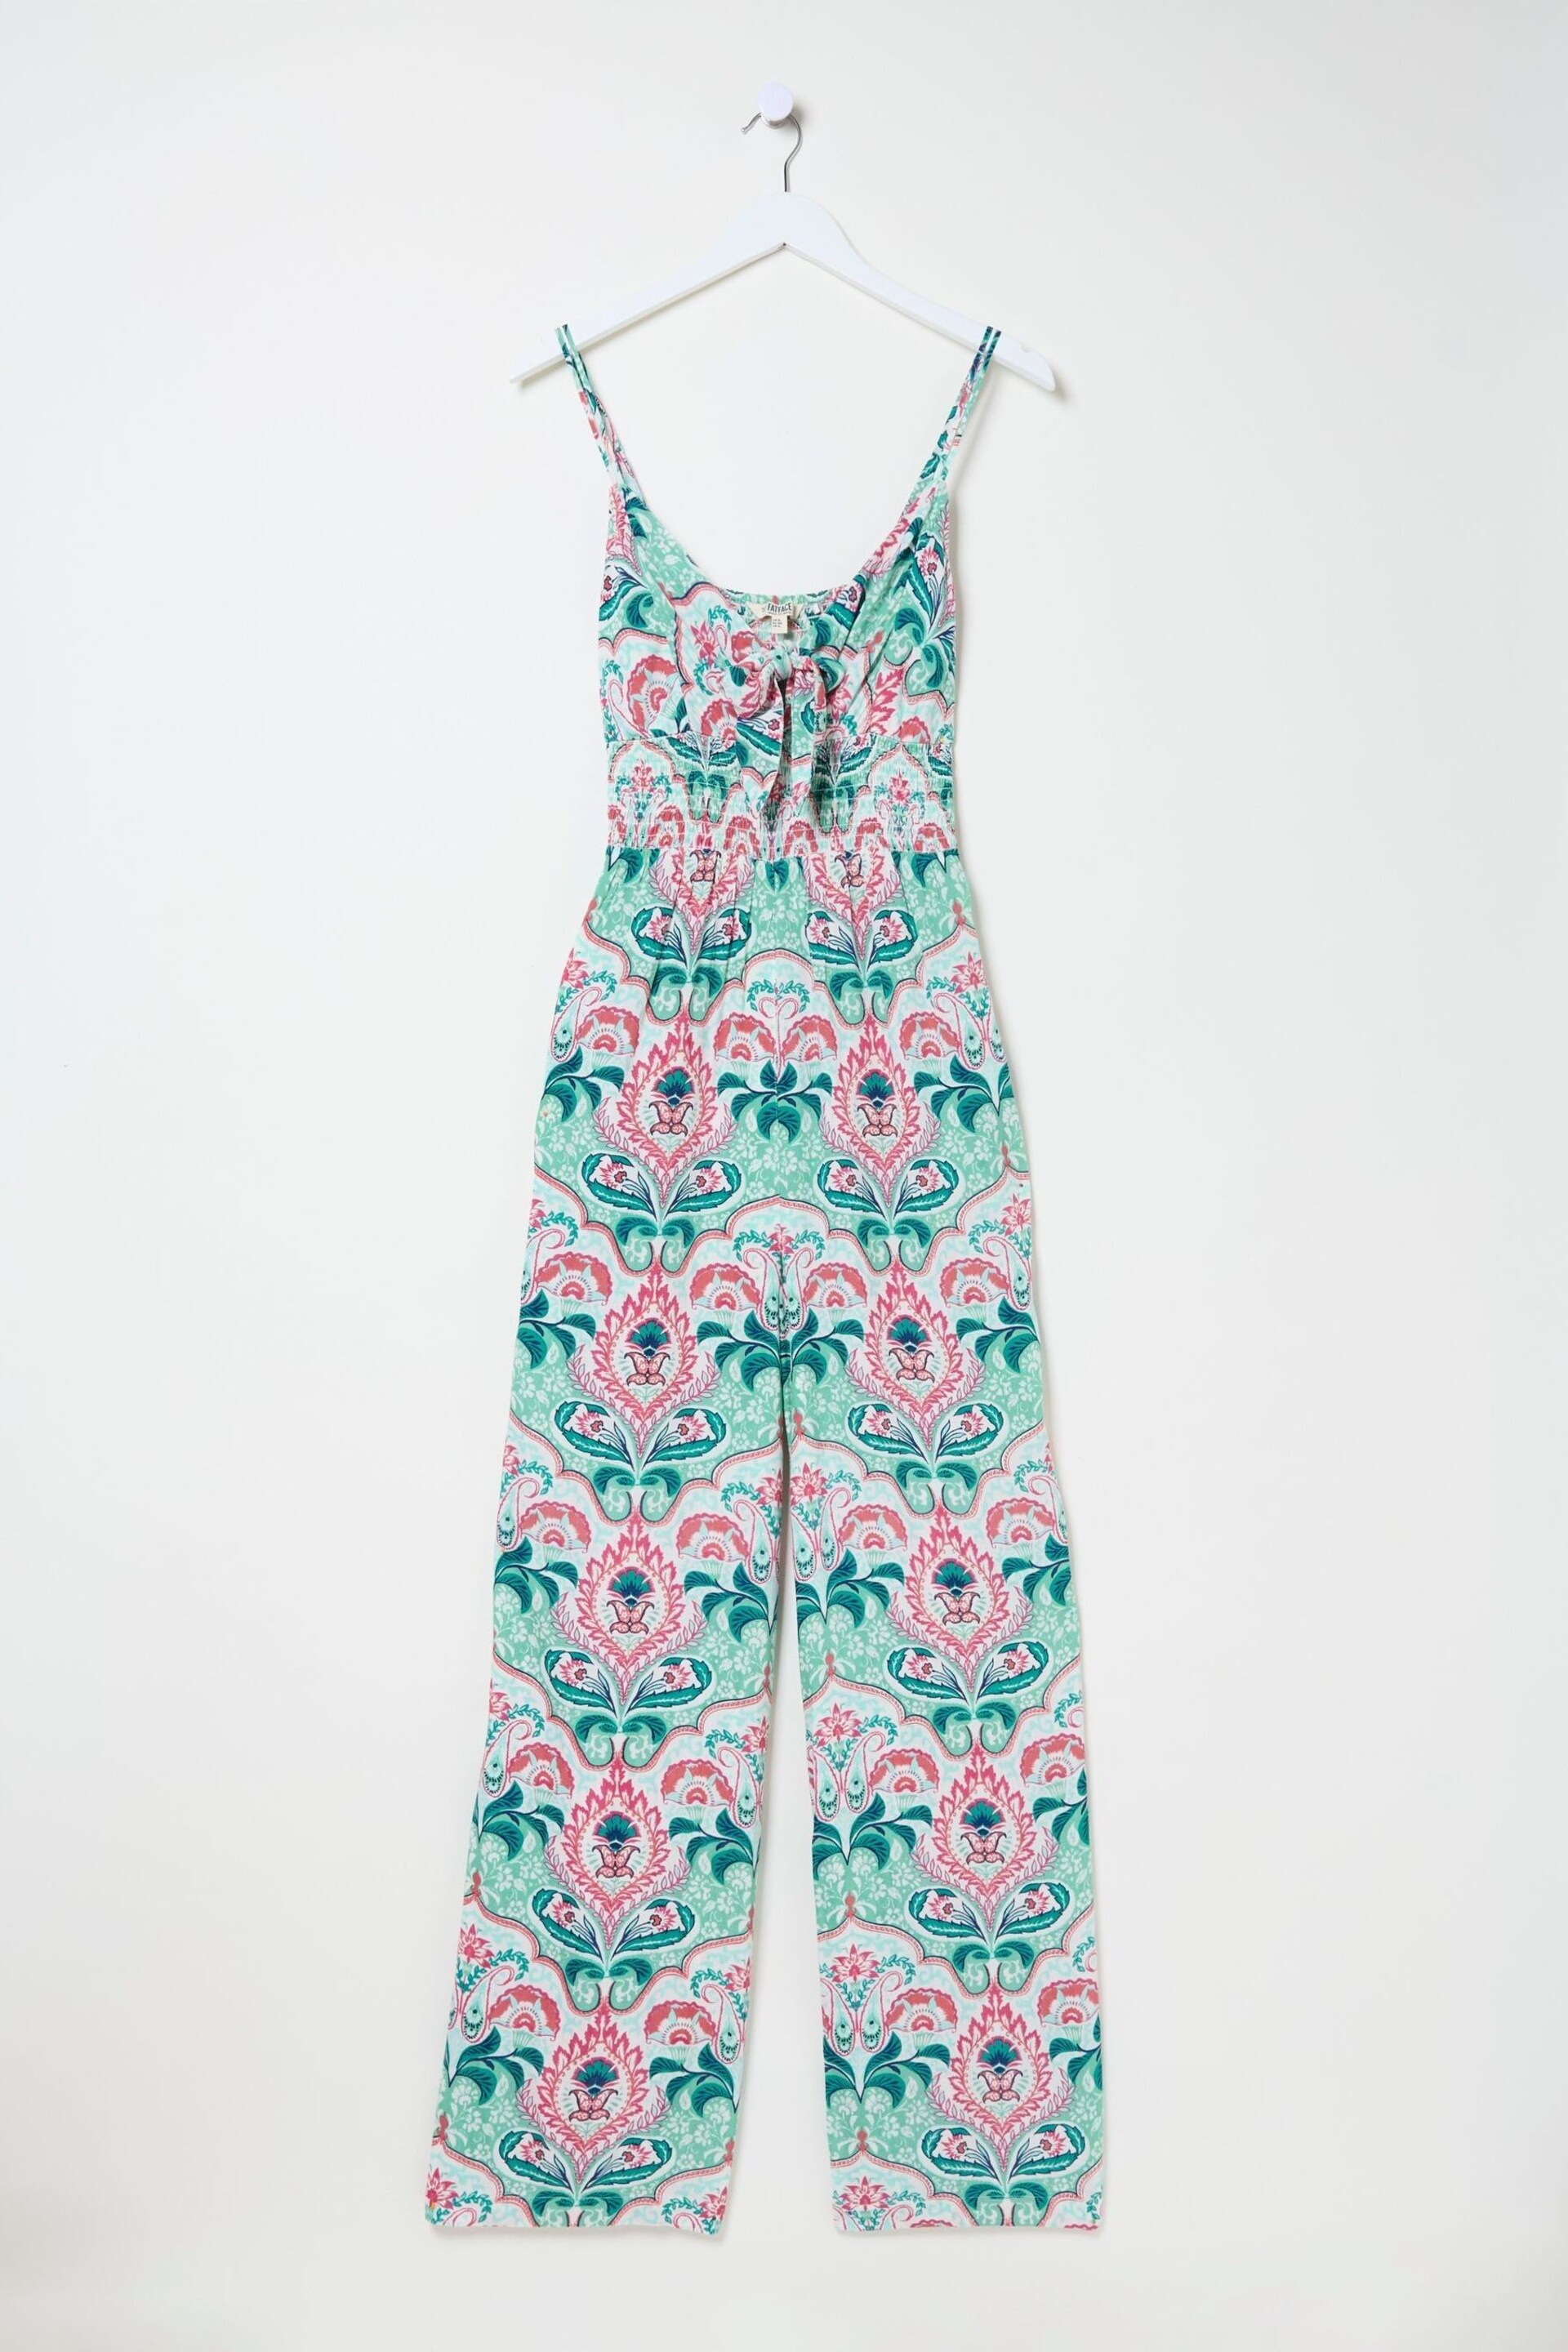 FatFace Green Mirrored Paisley Jumpsuit - Image 5 of 5